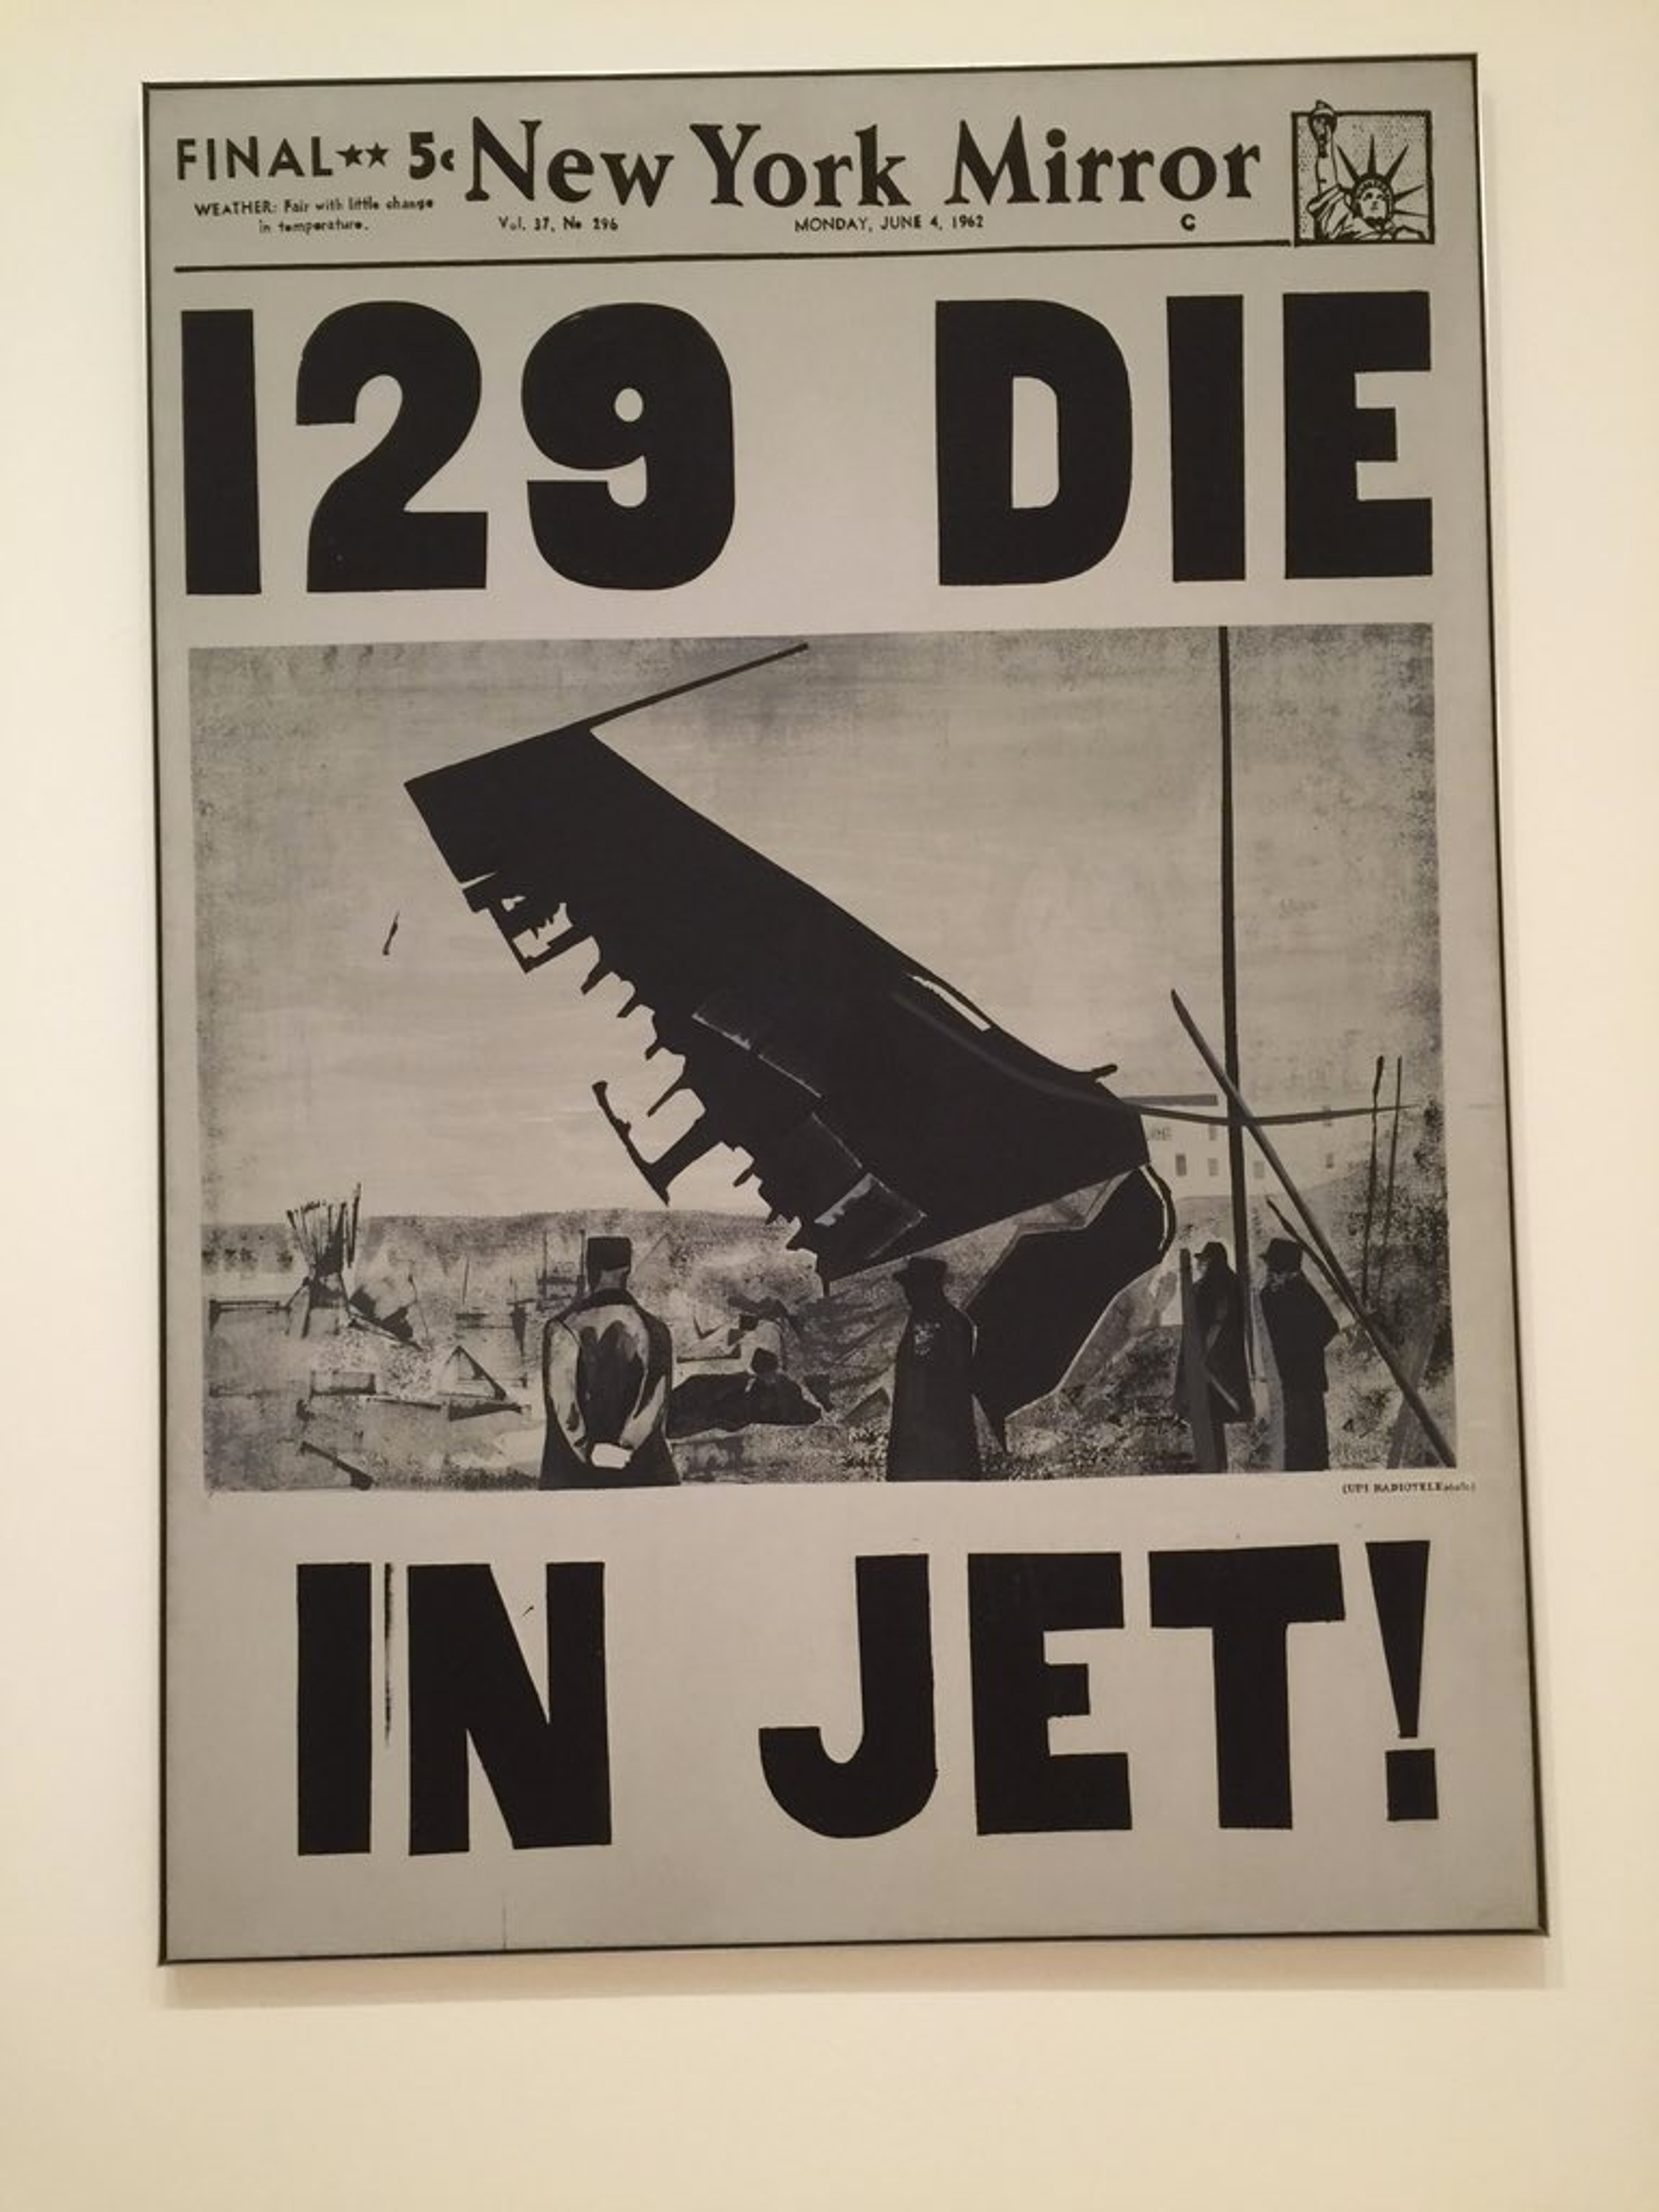 An image of the artwork 129 Die In Jet! by Andy Warhol - a black and white reproduction of the headline of the same name, illustrated with a destroyed plane wing.